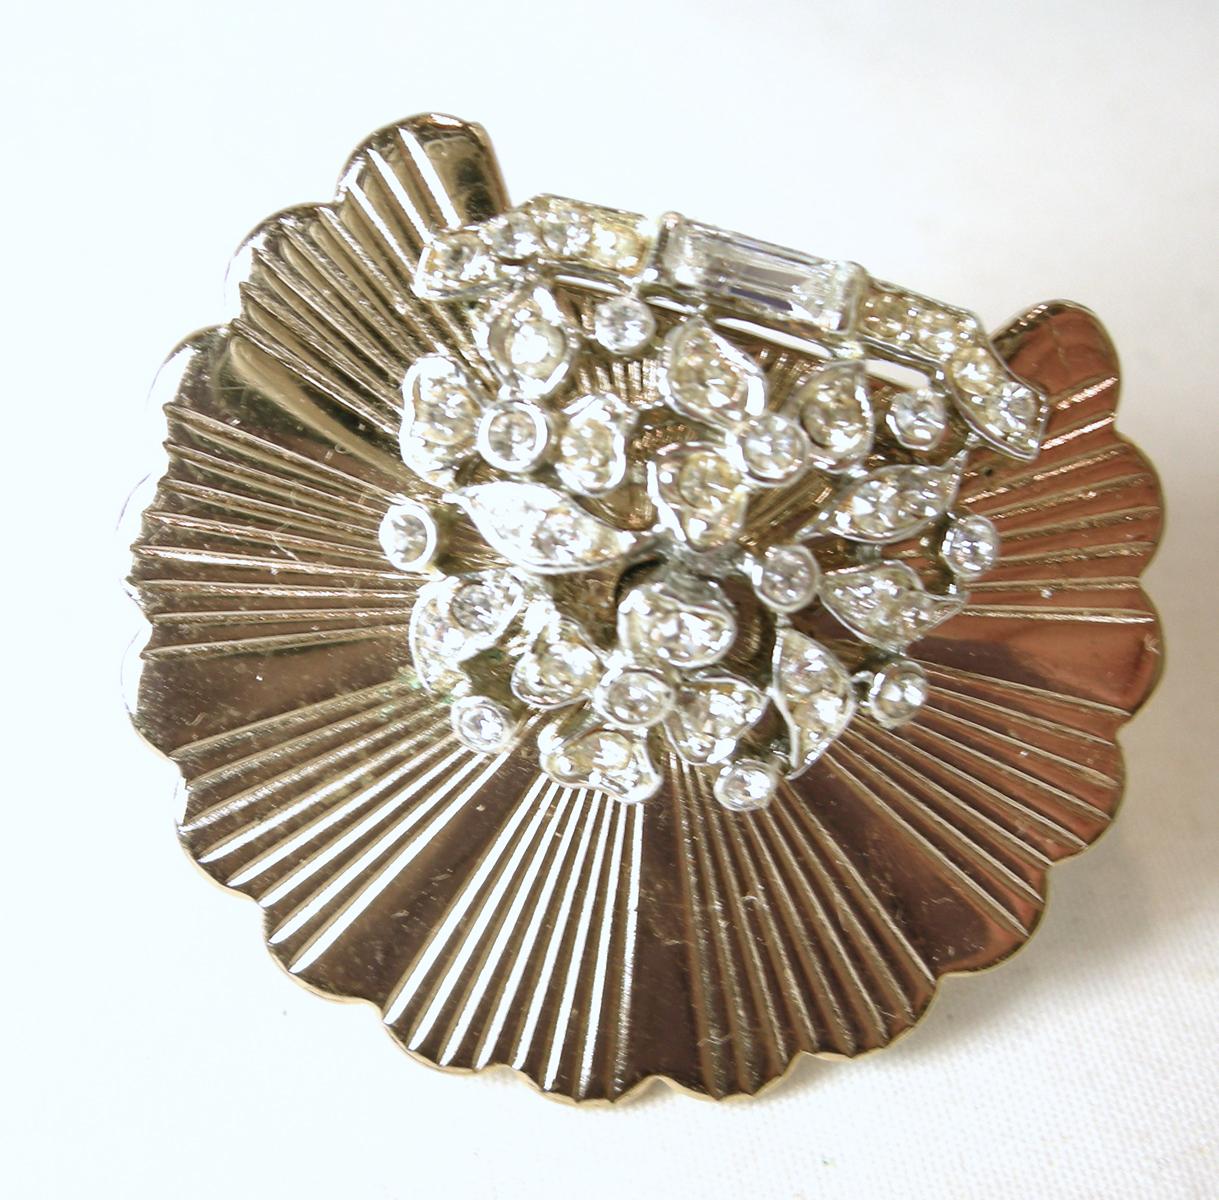 This vintage signed Marboux brooch and earrings set has a scallop design with different shaped crystals in the middle to top…in a gold tone setting.  The brooch measures 1-1/2” across/diameter.  The matching clip earrings are 1”.  In excellent